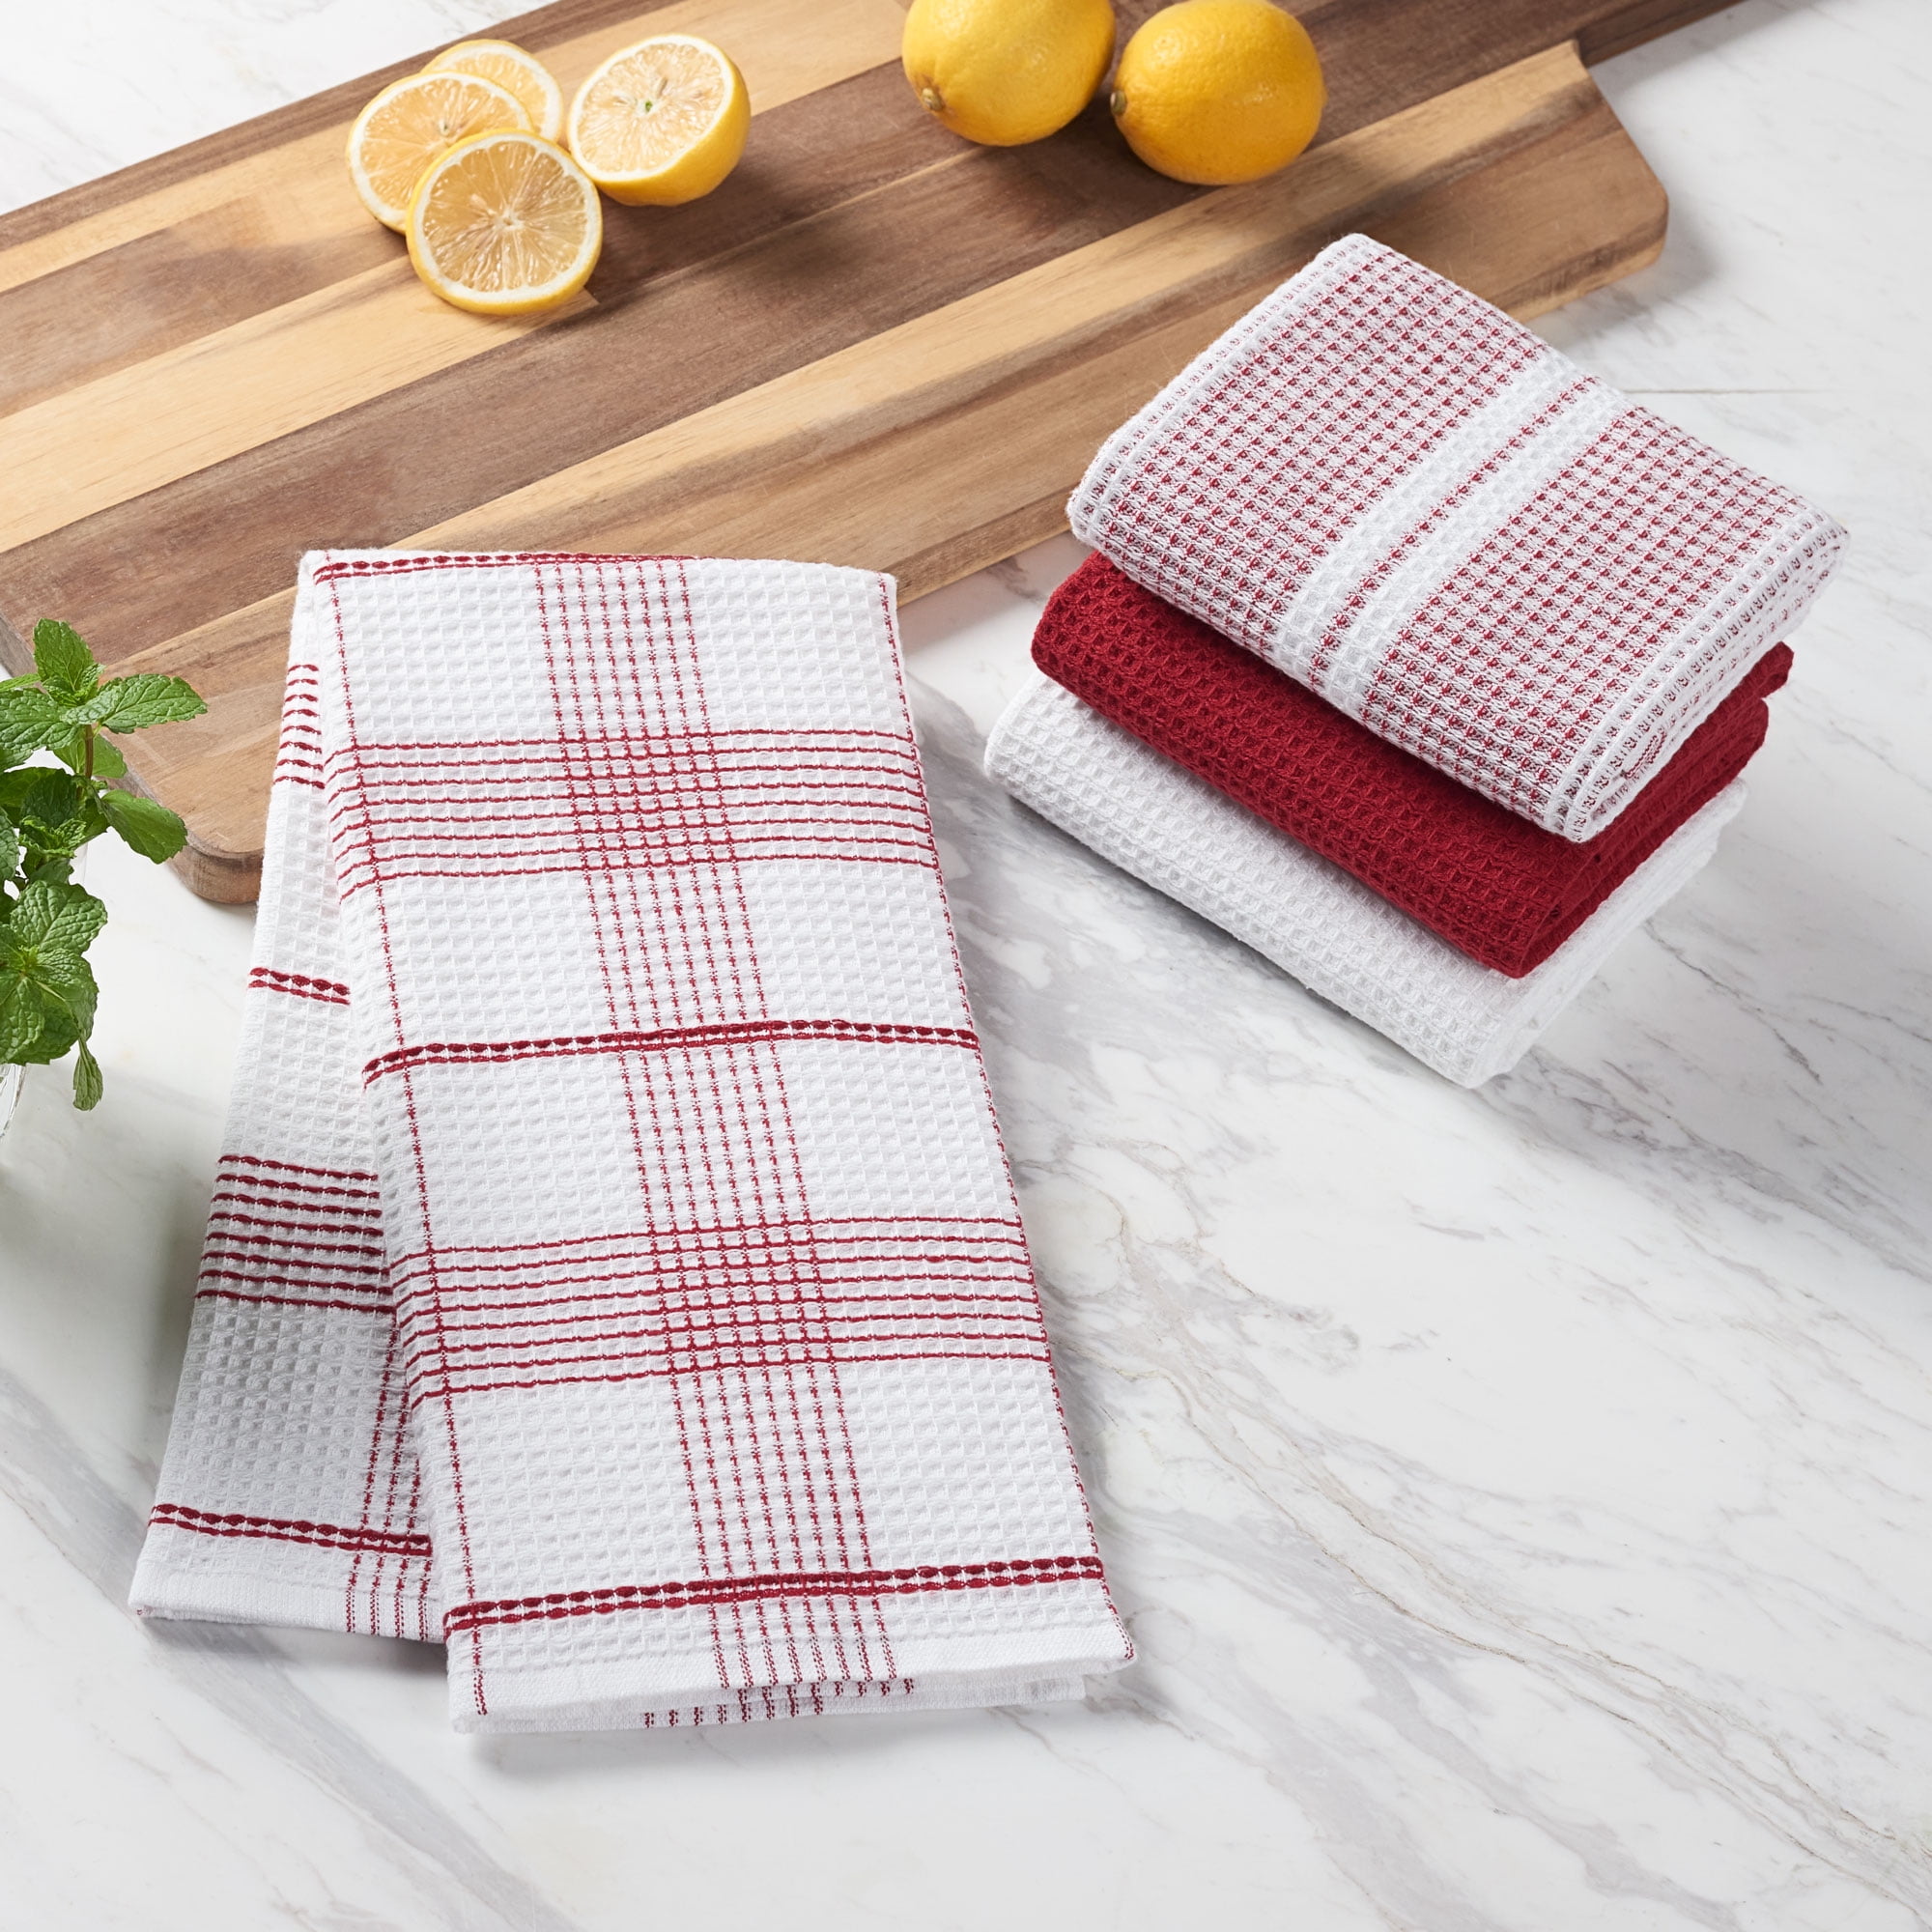 Excellent Deals Kitchen Towels [ 5 Pack, 16 x 22 ] - Multi Color  Lightweight Waffle Dish Towels, Dish Cloth, Tea Towels, Cleaning Towels and  Cotton